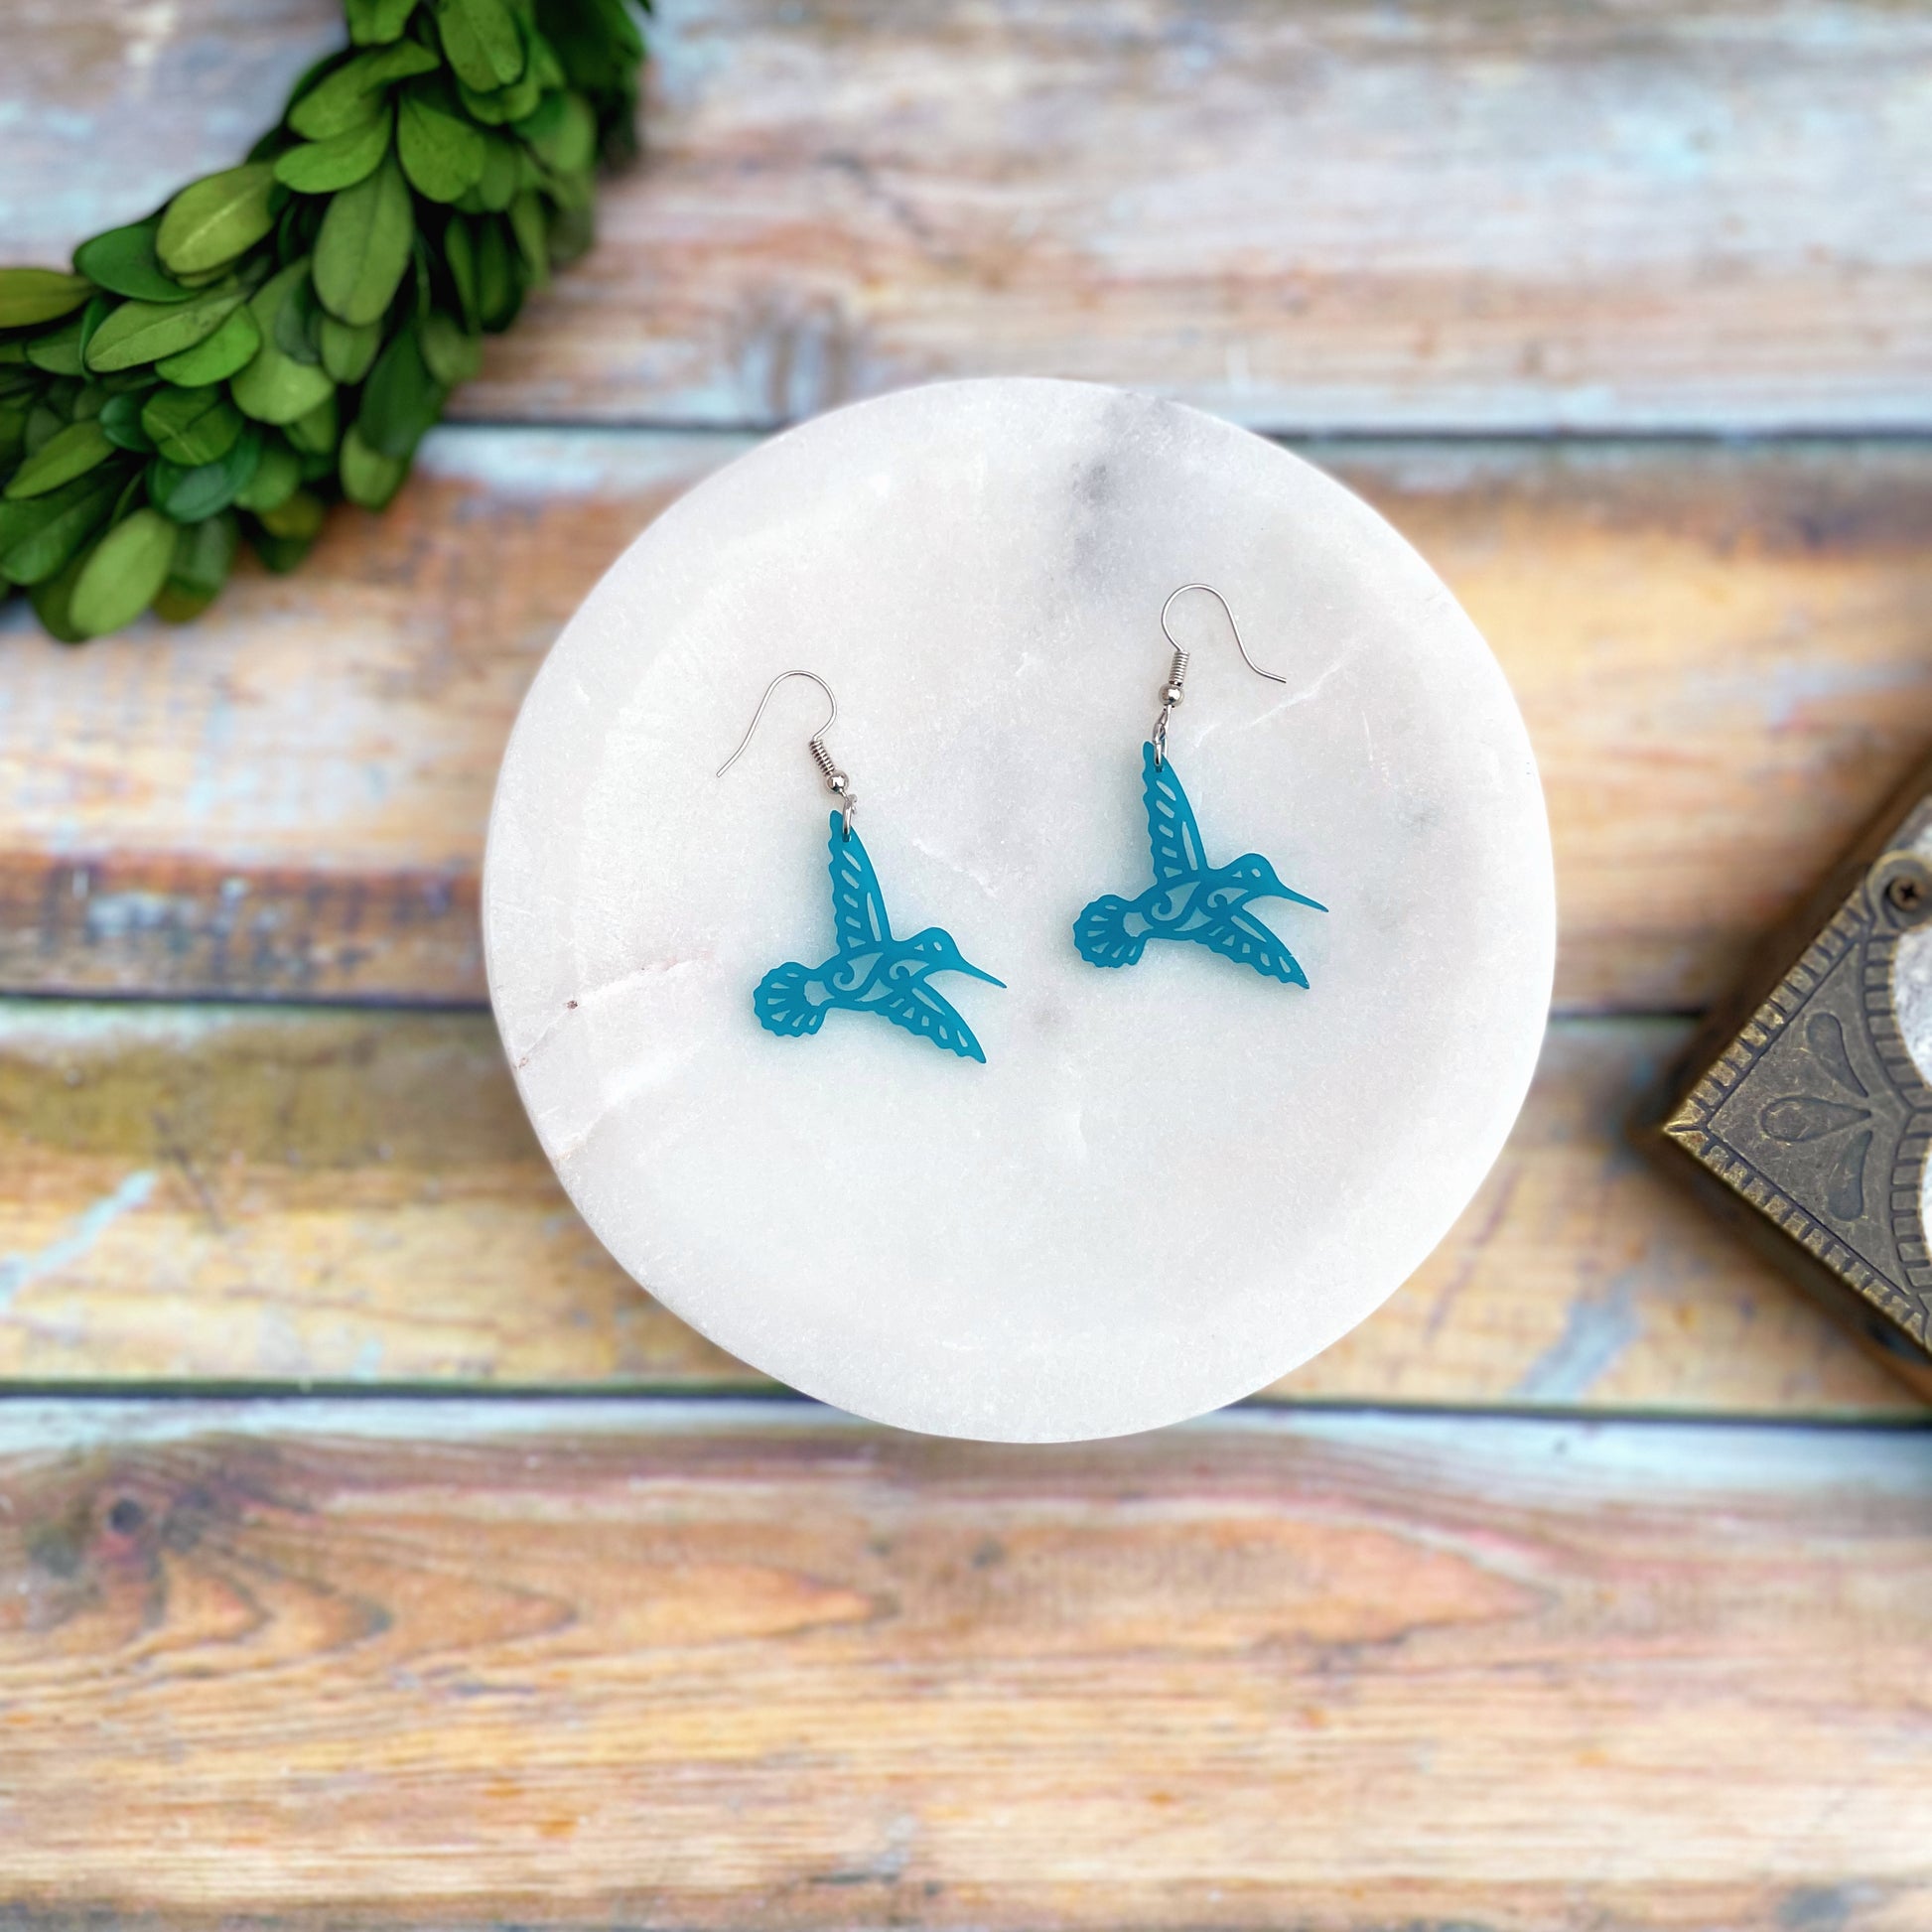 Laser cut frosted teal acrylic Hummingbird earrings